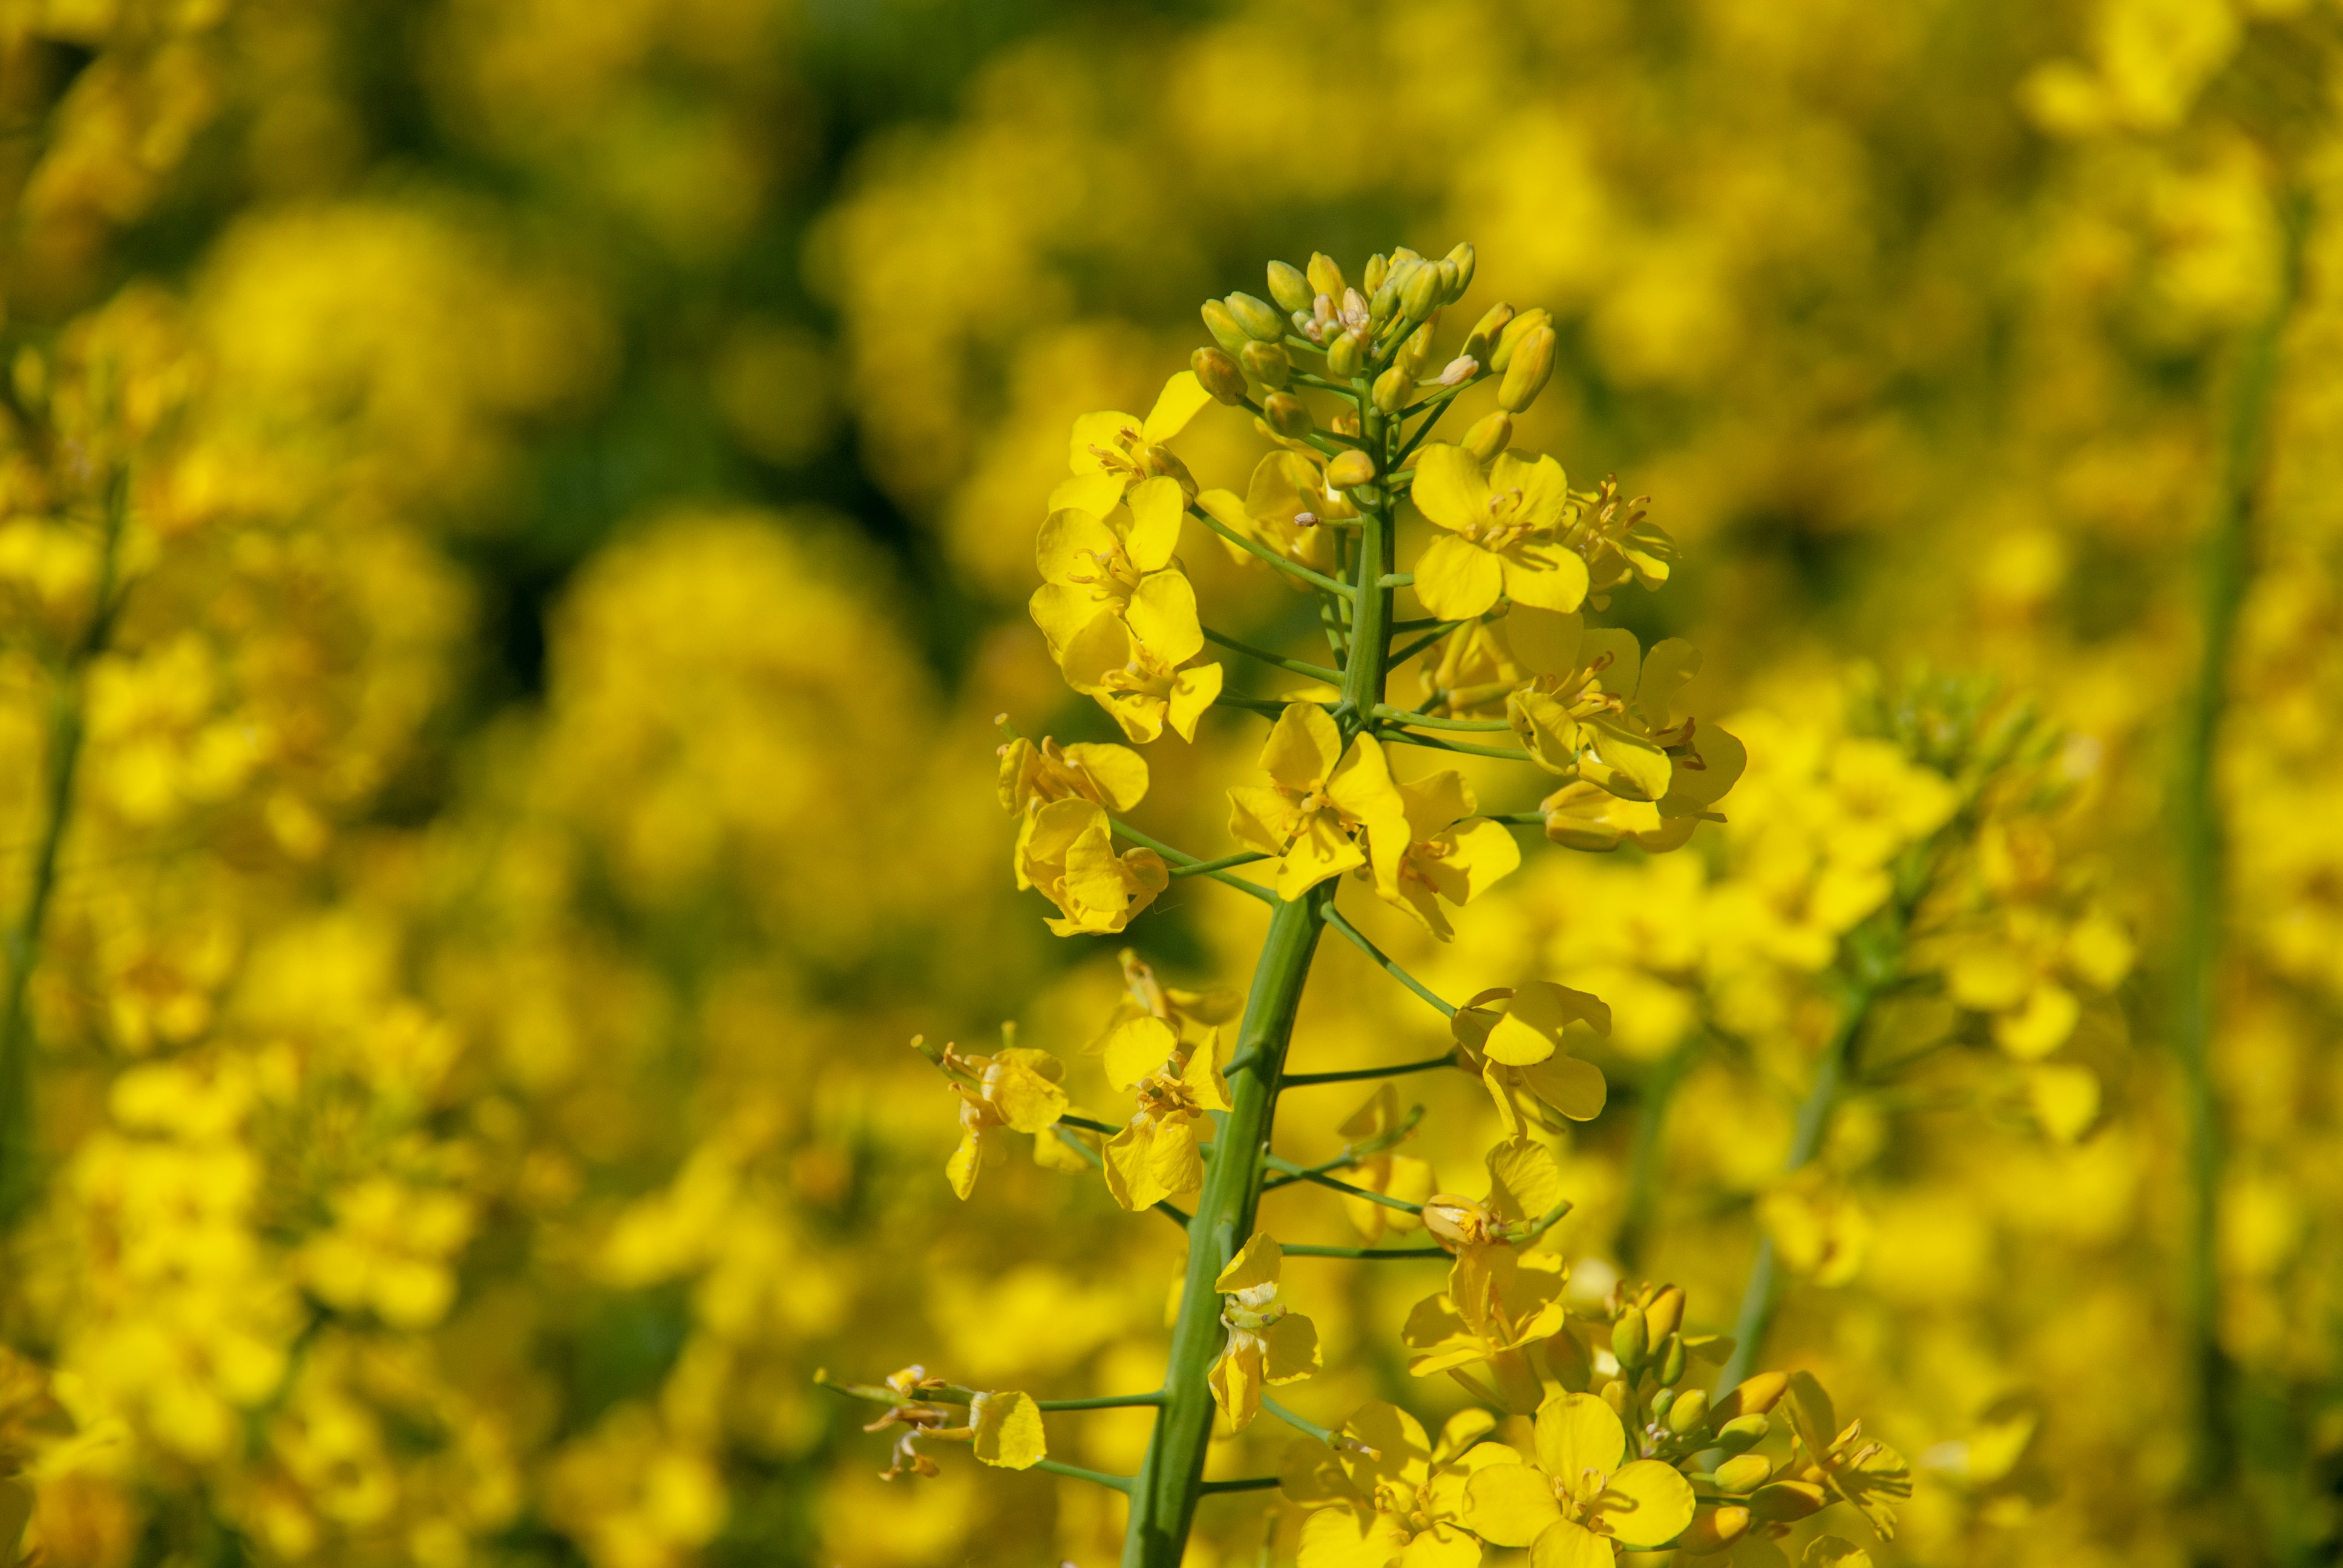 NRGene and GIFS Help Map Broad Genetic Diversity of Canola Crop